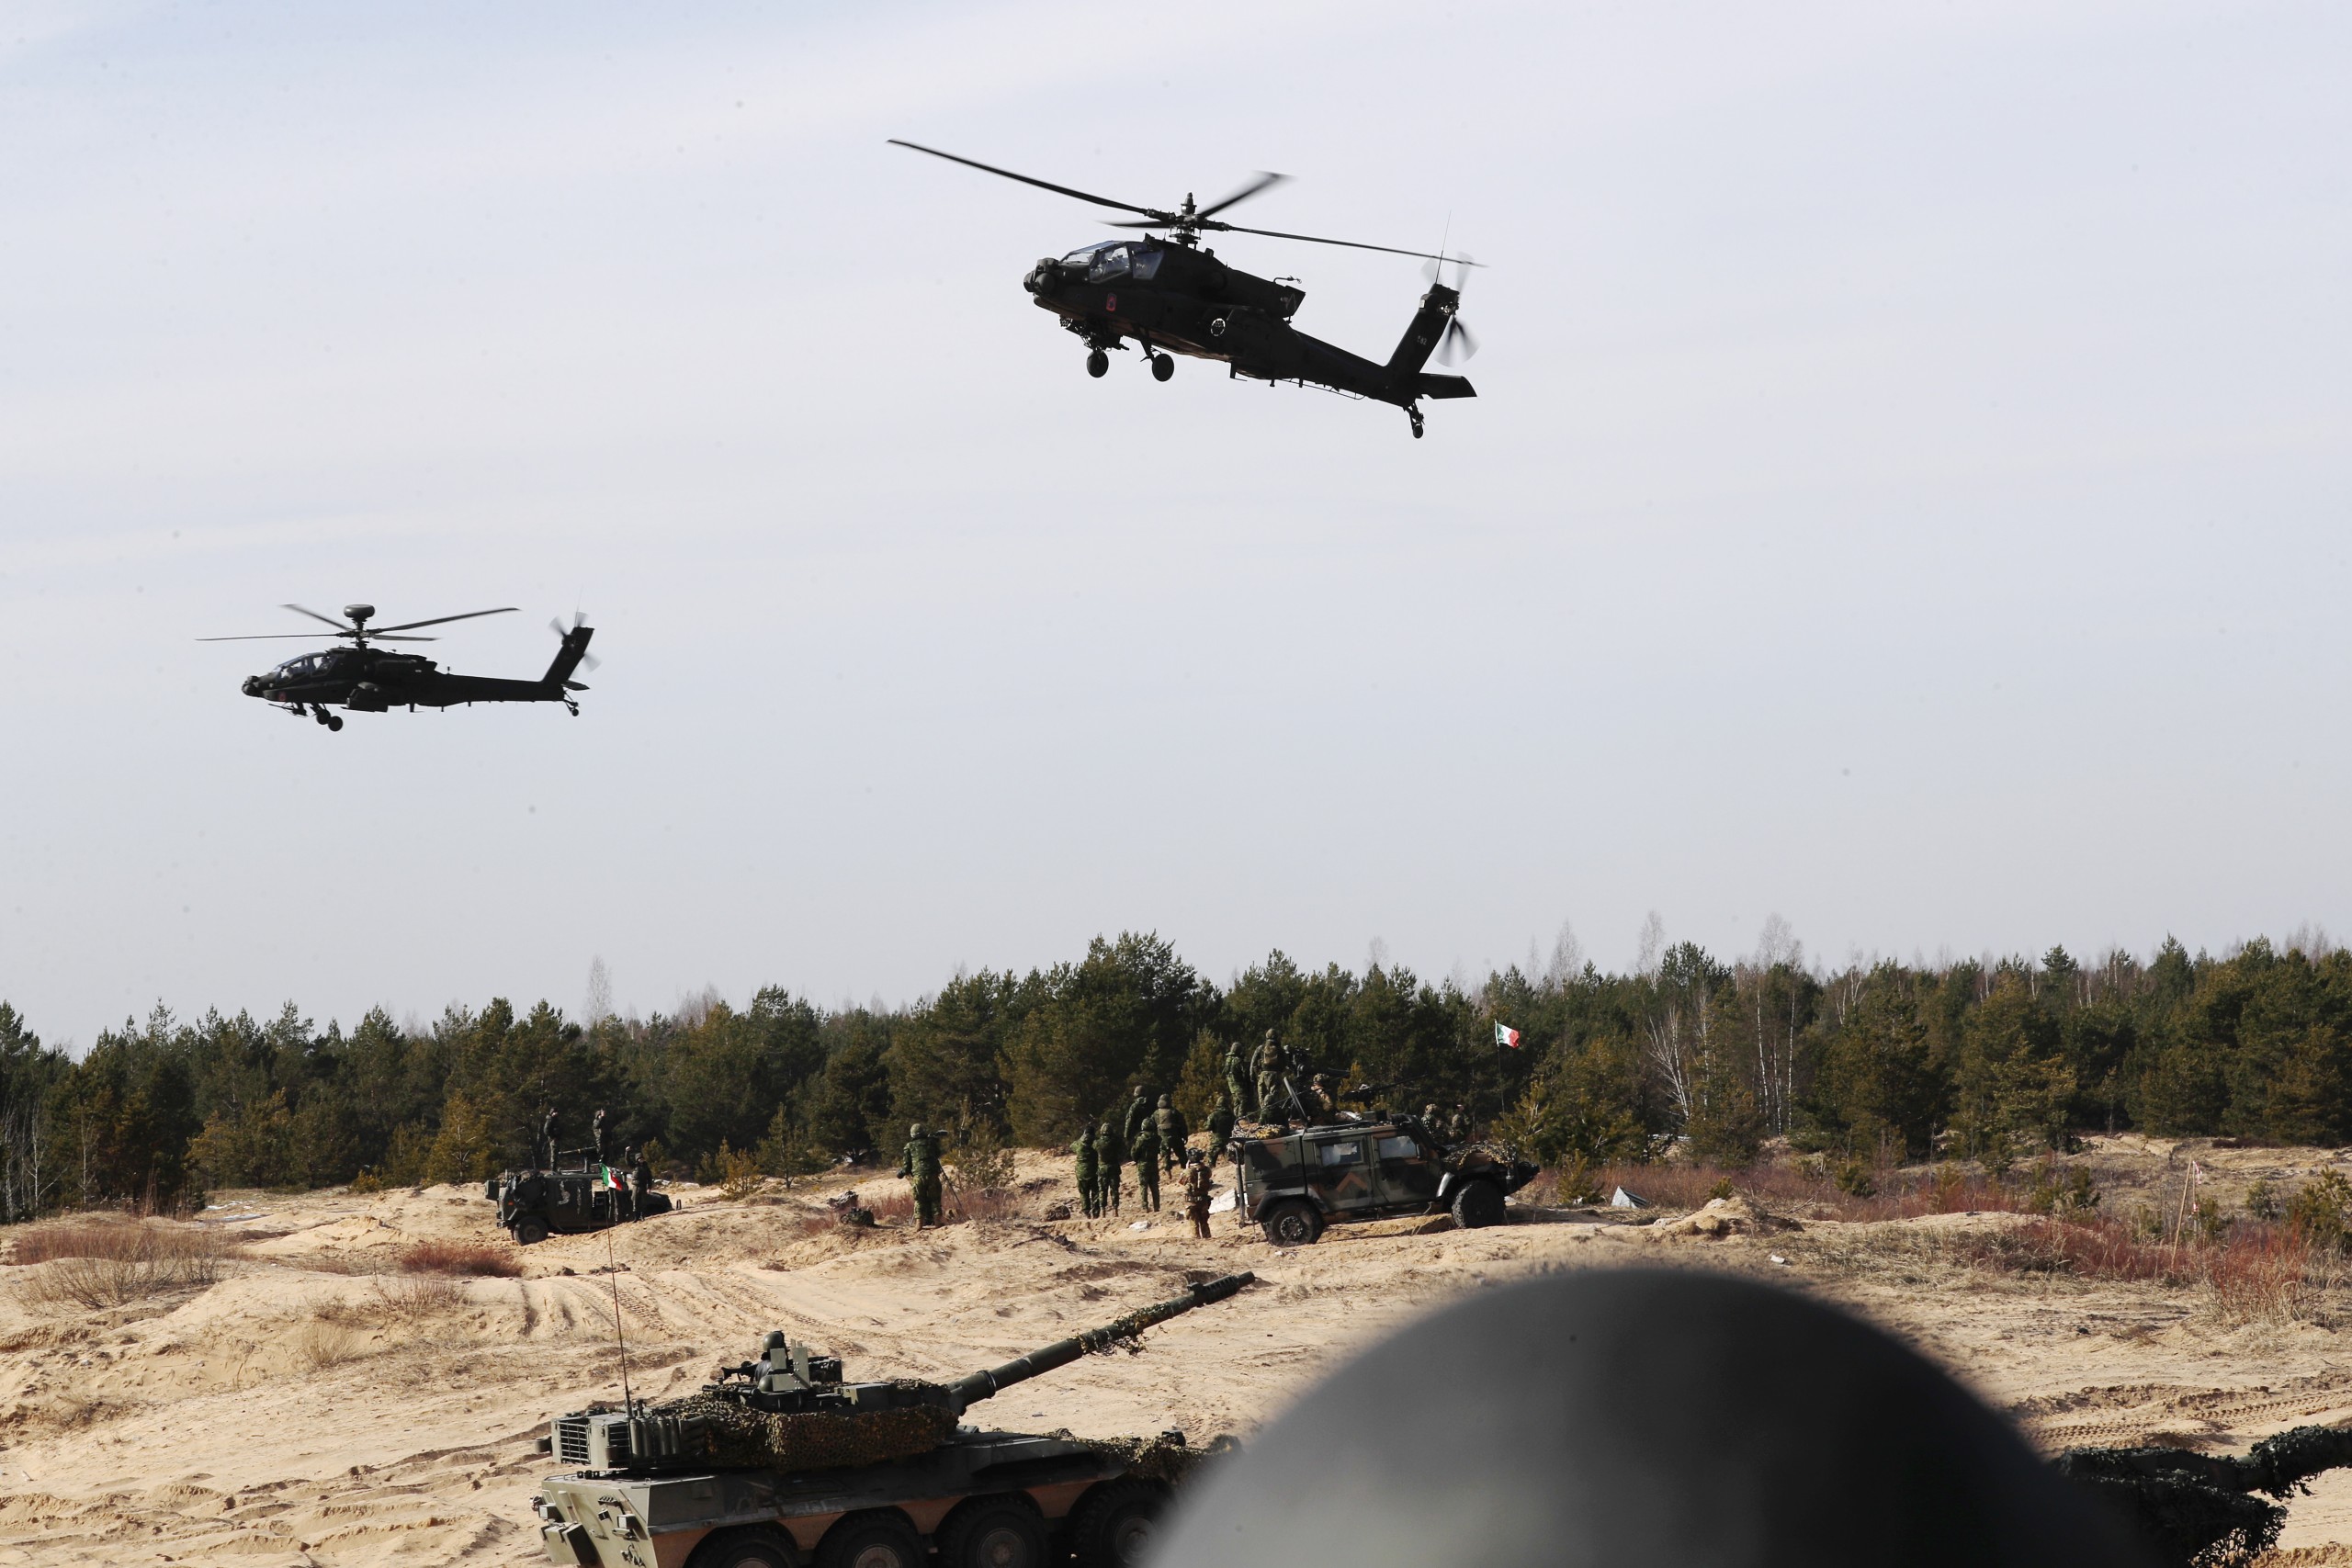 epa09817851 US combat helicopters AH-64 Apache and tanks during the international military exercise Crystal Arrow 22, organized by Mechanized Infantry Brigade of the Latvian Land Forces in Adazi training ground, Latvia, 11 March 2022. The purpose of the force demonstration is to demonstrate the interoperability of multinational units in various operations and to demonstrate NATO's combat capabilities for the protection of any member of the Alliance. With the conclusion of the Crystal Arrow 2022 exercise, the certification process of the NATO Extended Presence Battlegroup in Latvia is being successfully completed.  EPA/TOMS KALNINS